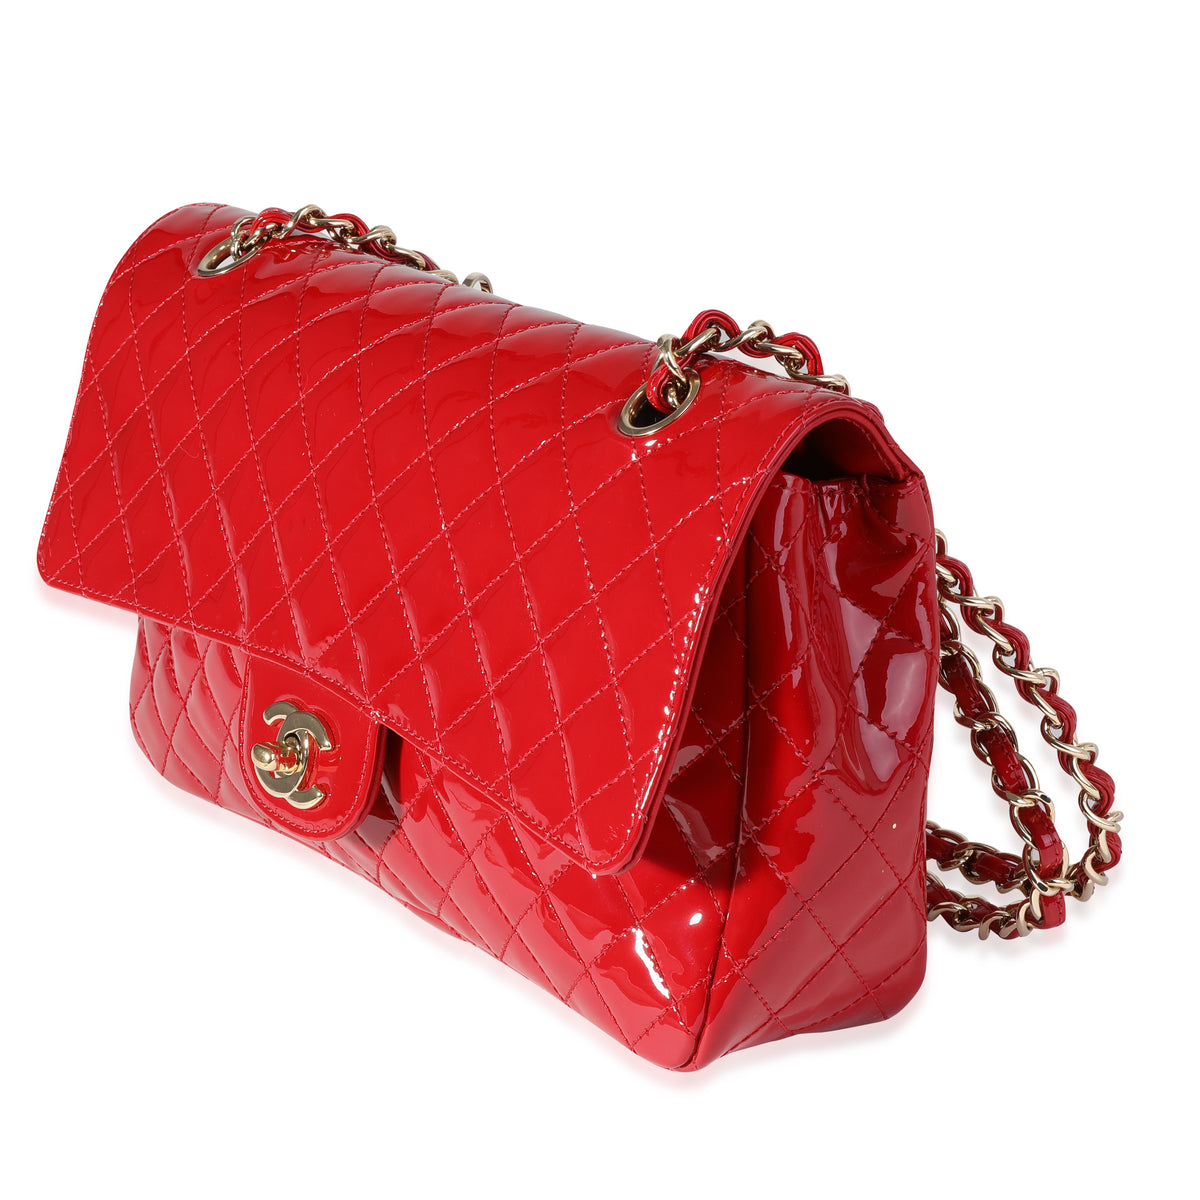 Chanel Red Quilted Patent Leather Valentine's Day Medium Single Flap Bag, myGemma